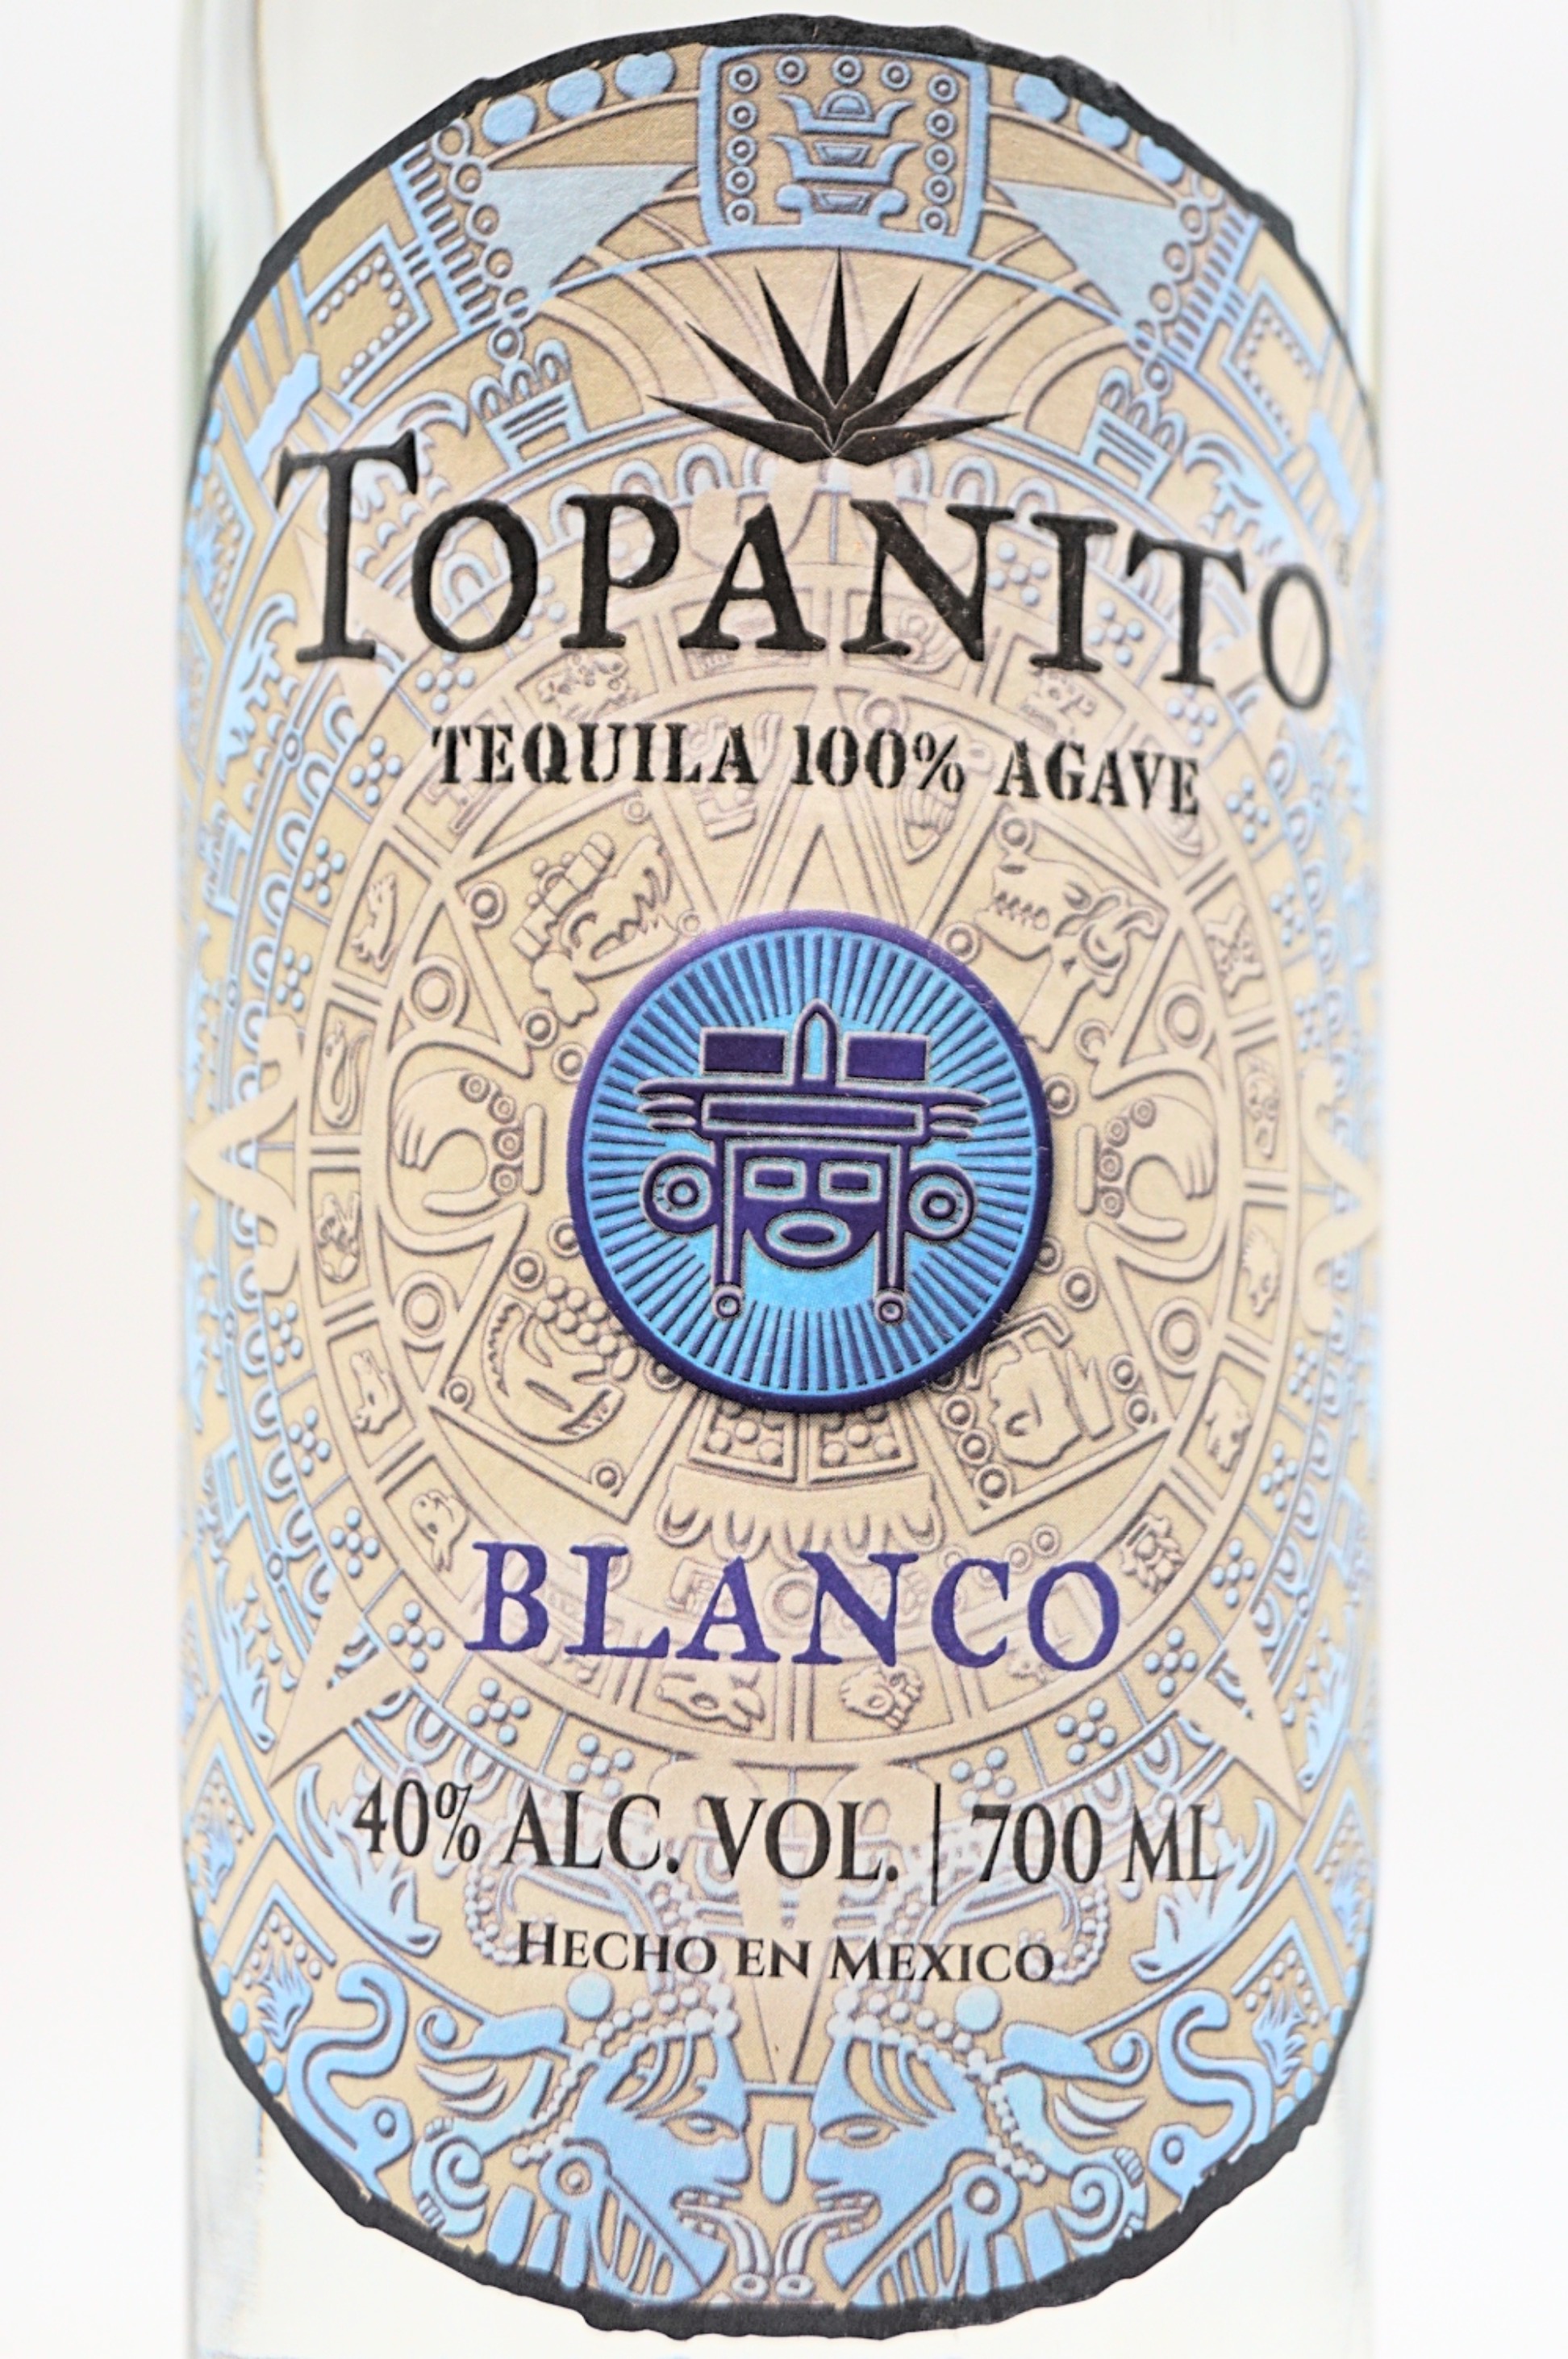 Blanco 100 % Agave Tequila